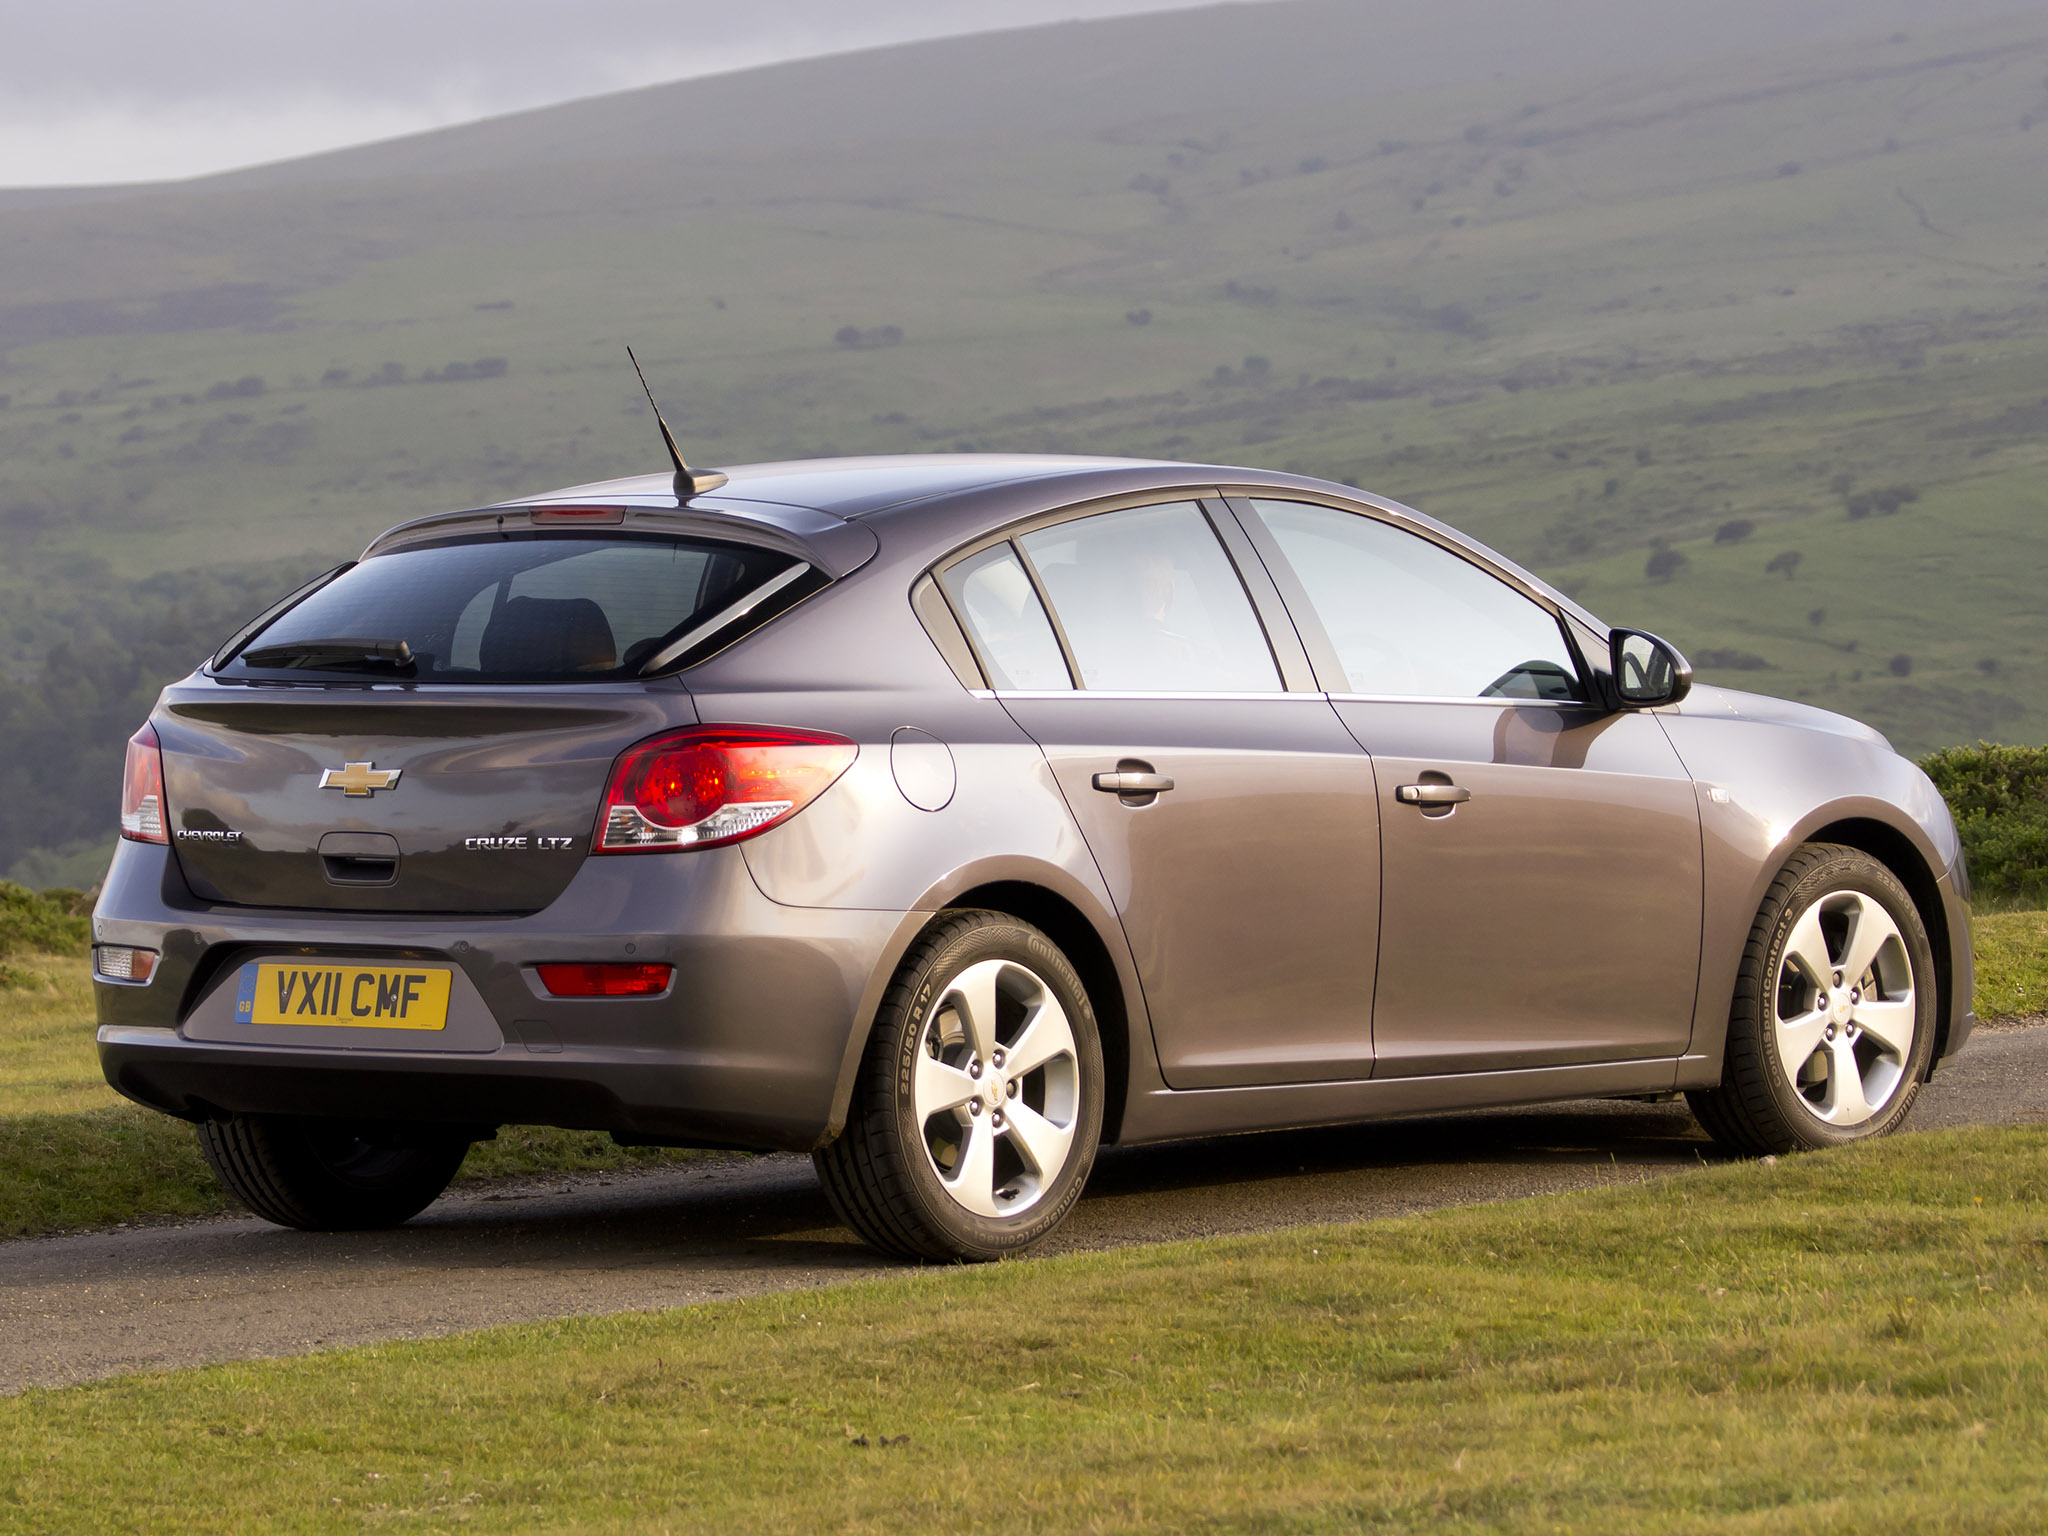 Car in pictures car photo gallery » Chevrolet Cruze